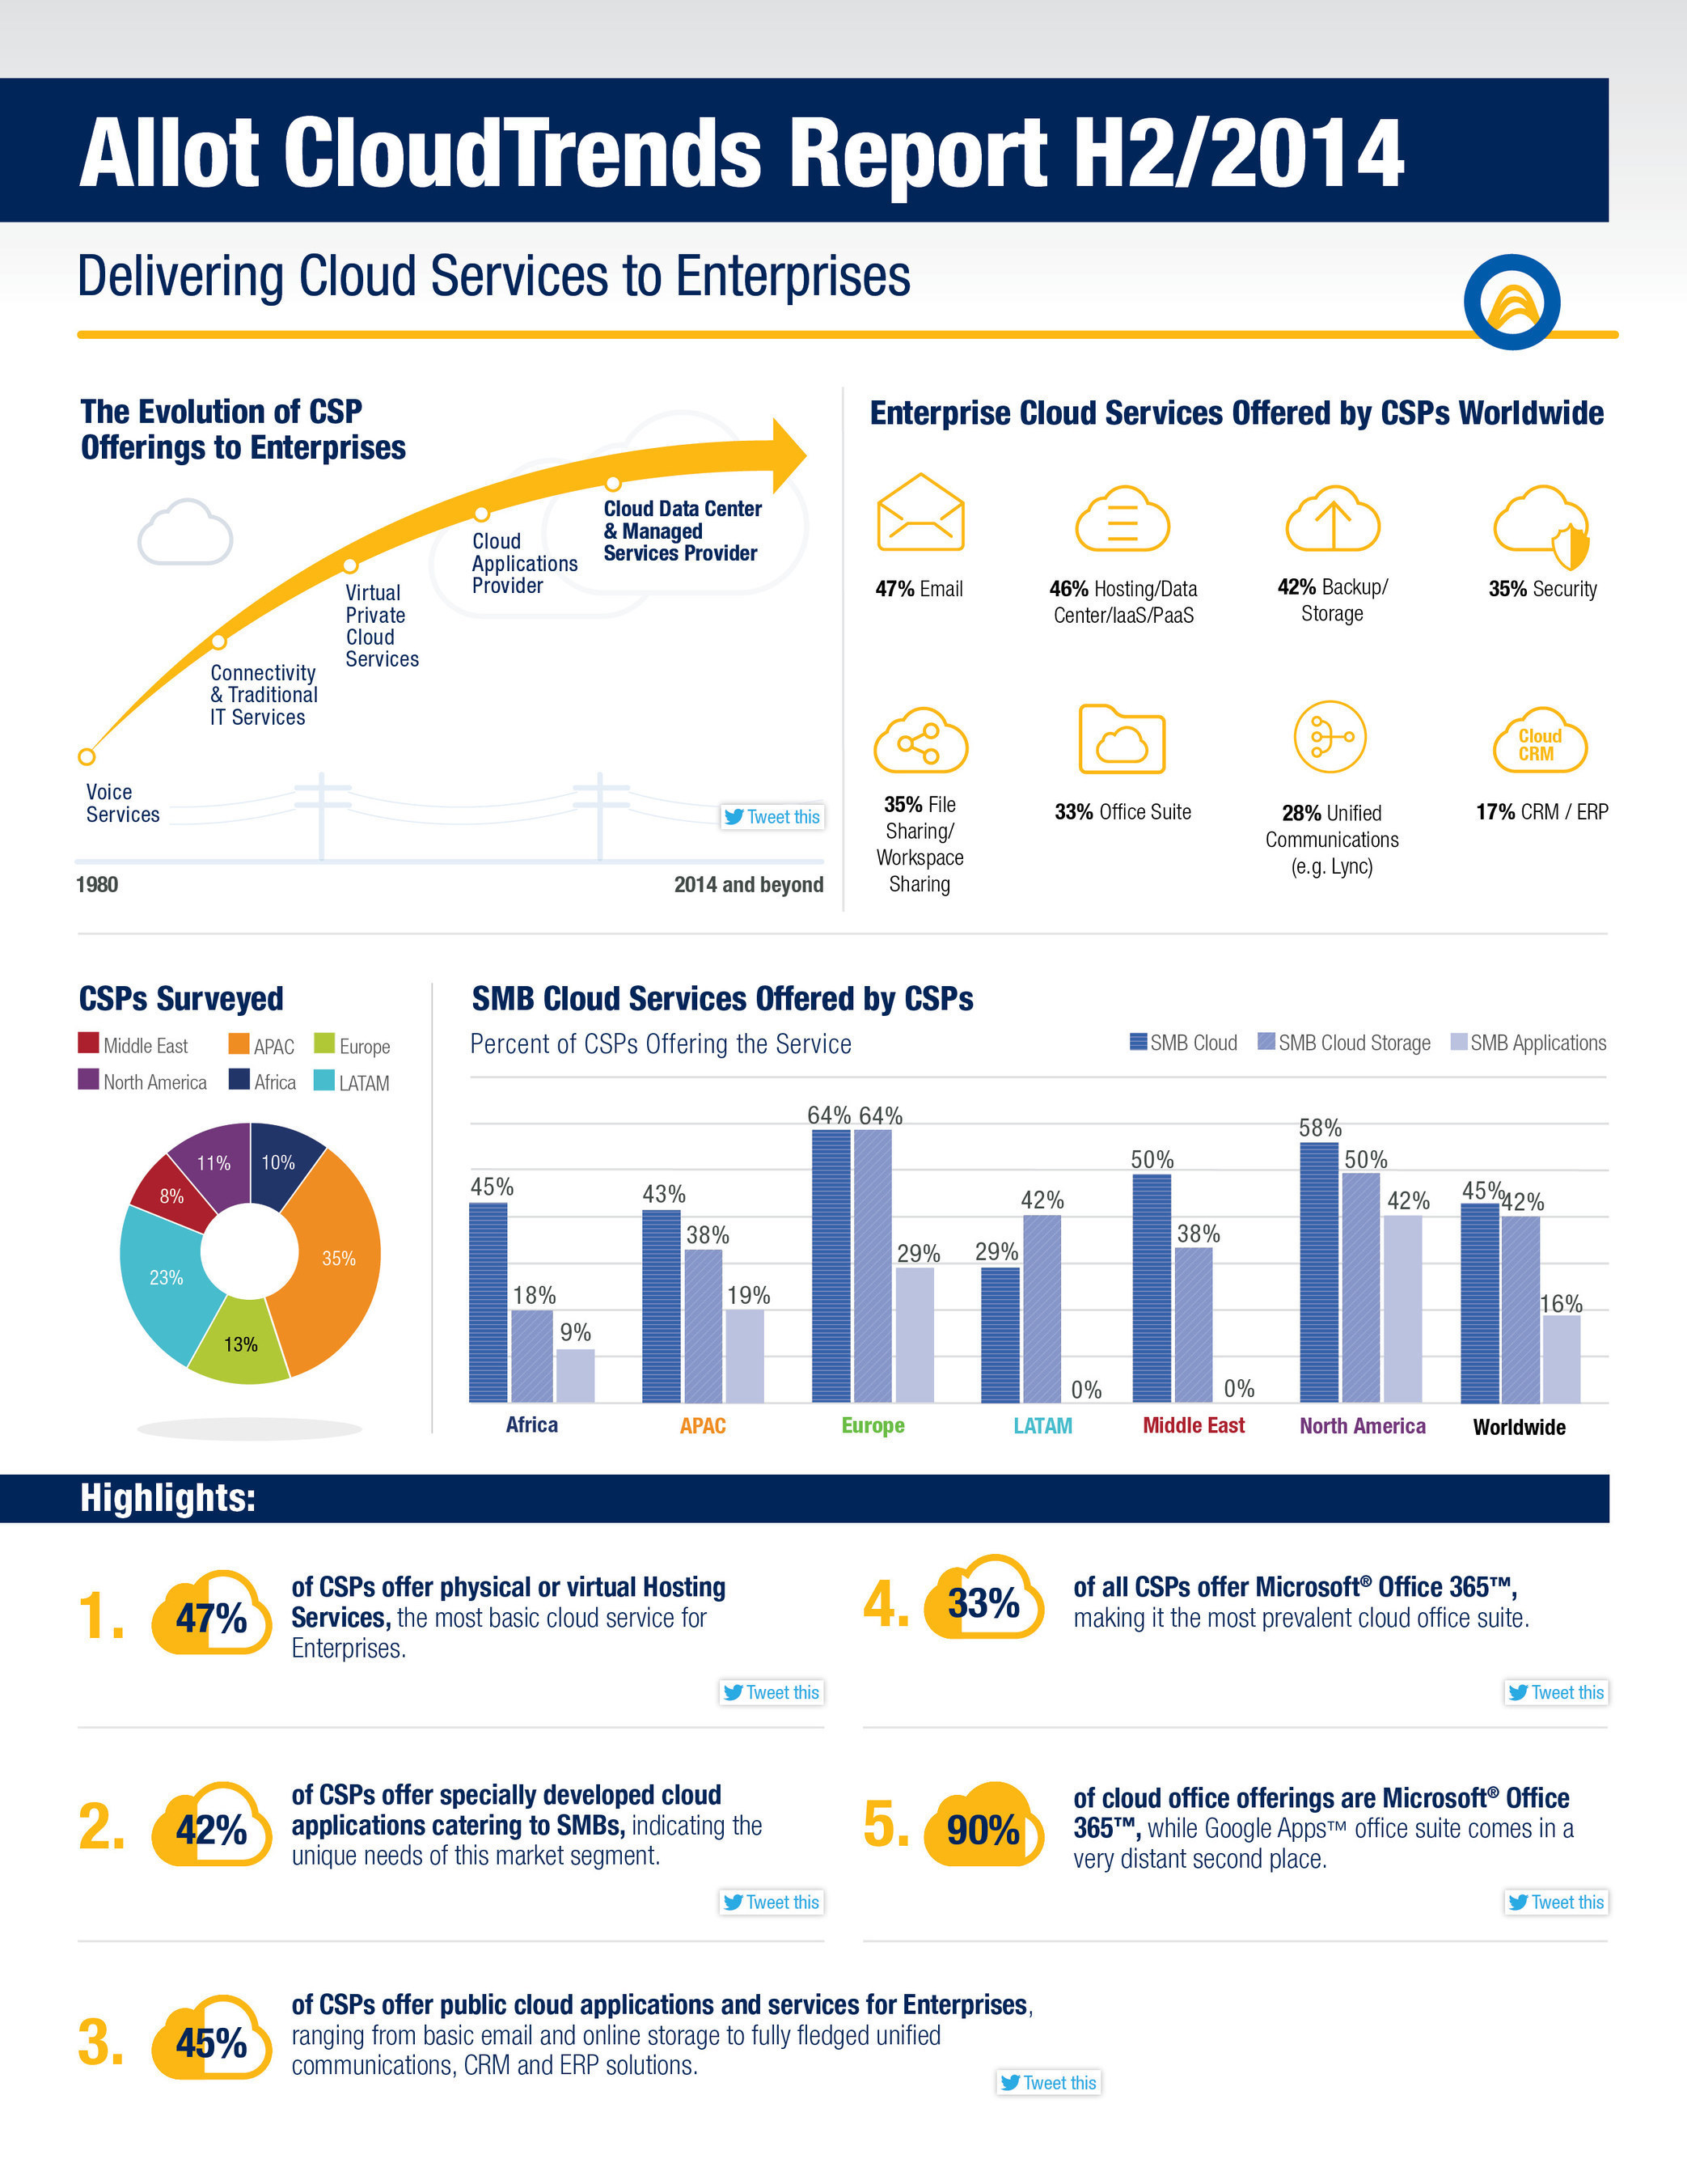 Allot CloudTrends Report Finds CSPs are Leveraging the Experience of Cloud Applications like Microsoft Office 365 and Lync